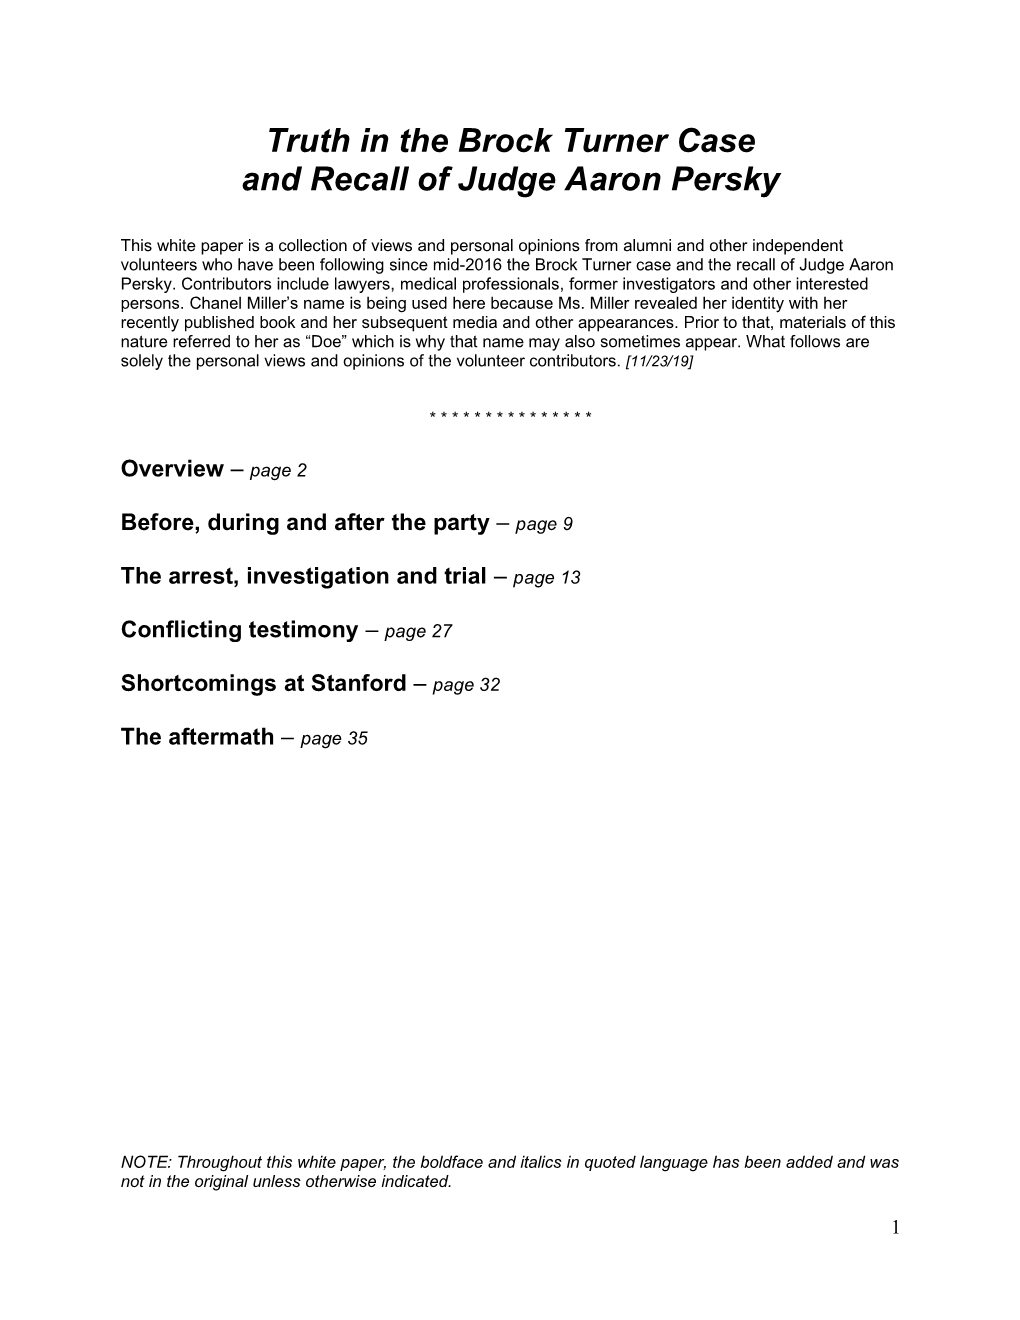 Truth in the Brock Turner Case and Recall of Judge Aaron Persky